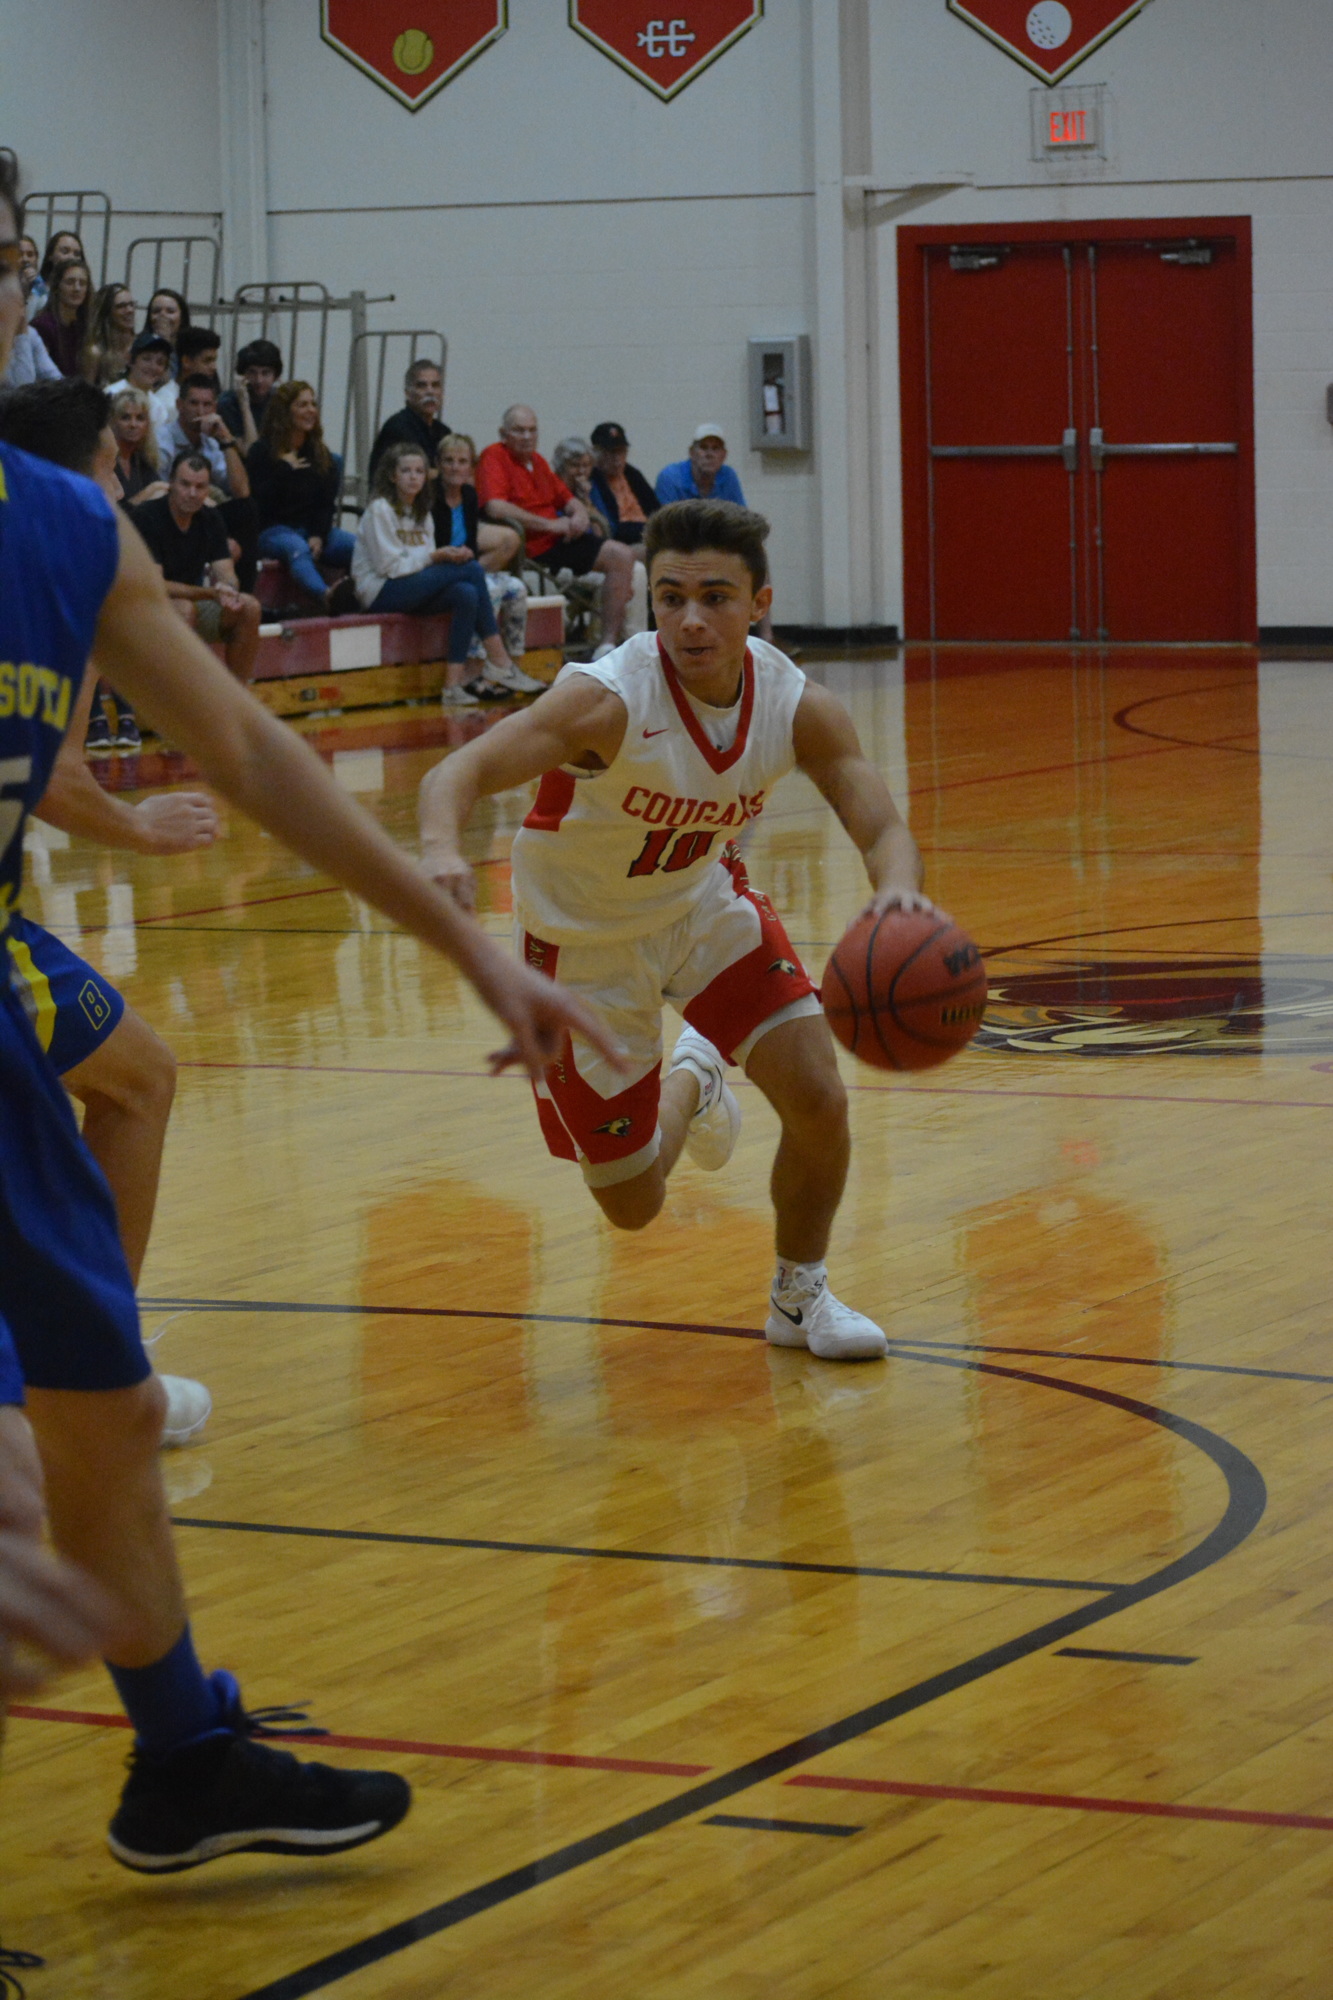 Dante Pascarella drives to the hoop against Sarasota Christian. He finished the game with 30 points.